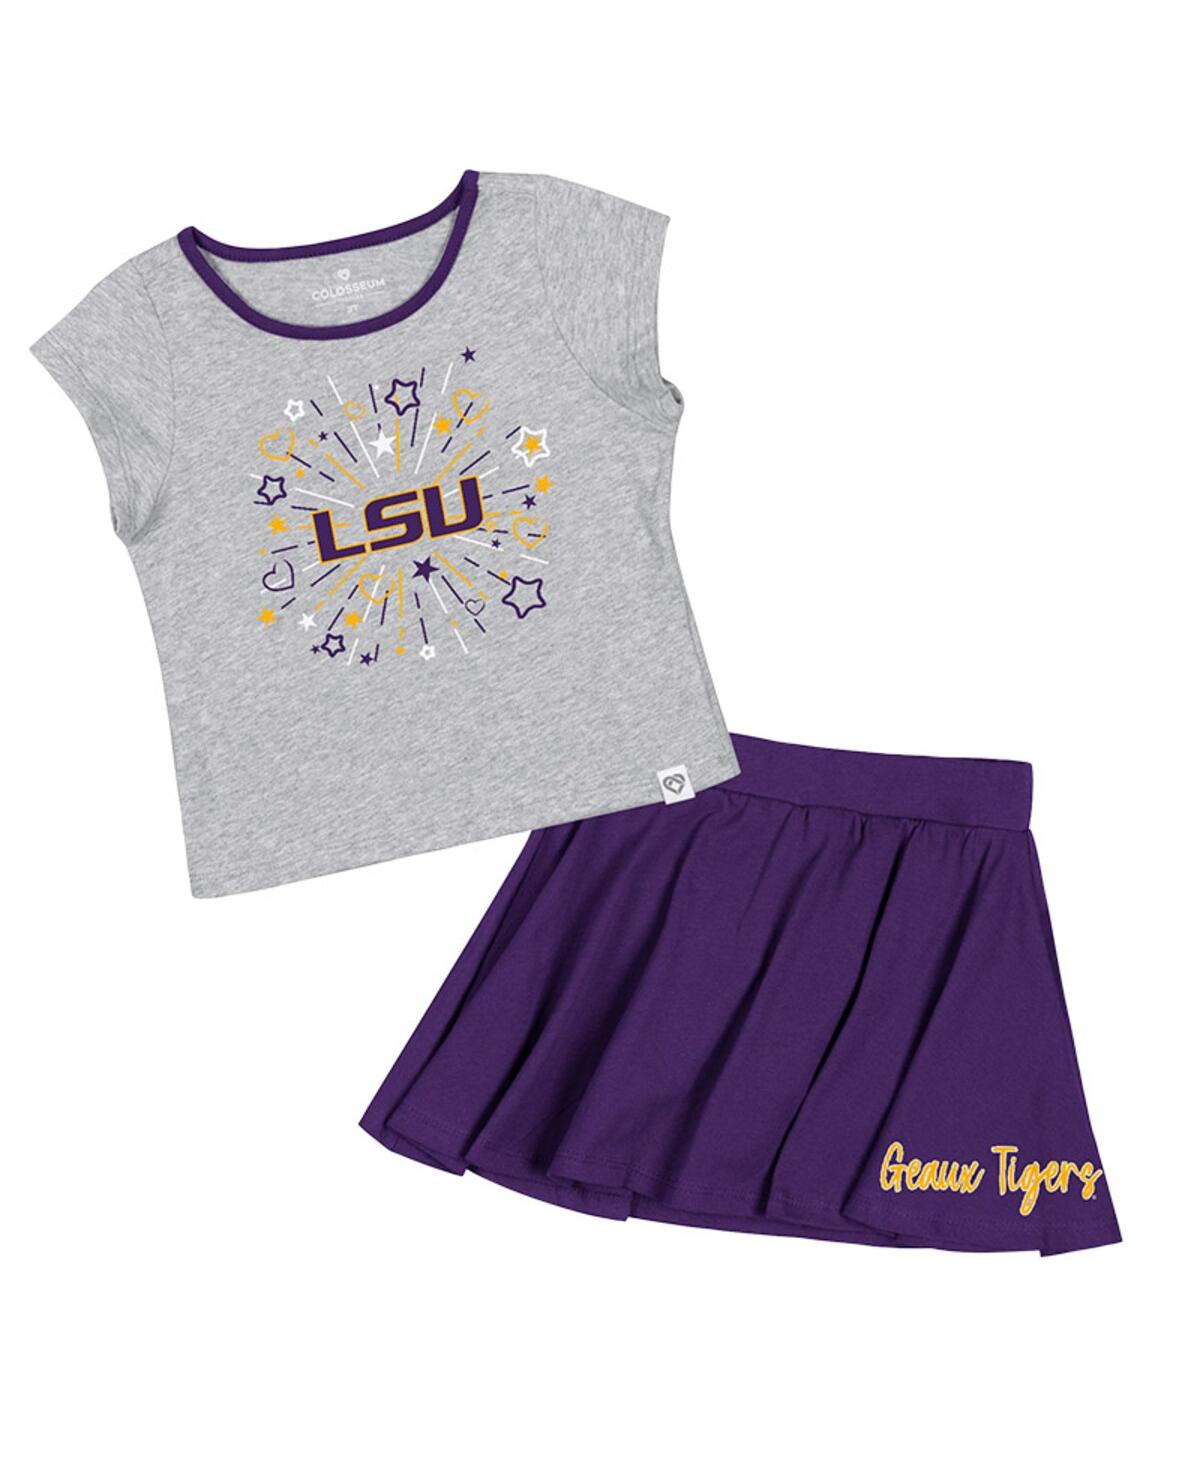 Colosseum Babies' Girls Toddler  Heather Gray, Purple Lsu Tigers Two-piece Minds For Molding T-shirt And Skir In Heather Gray,purple